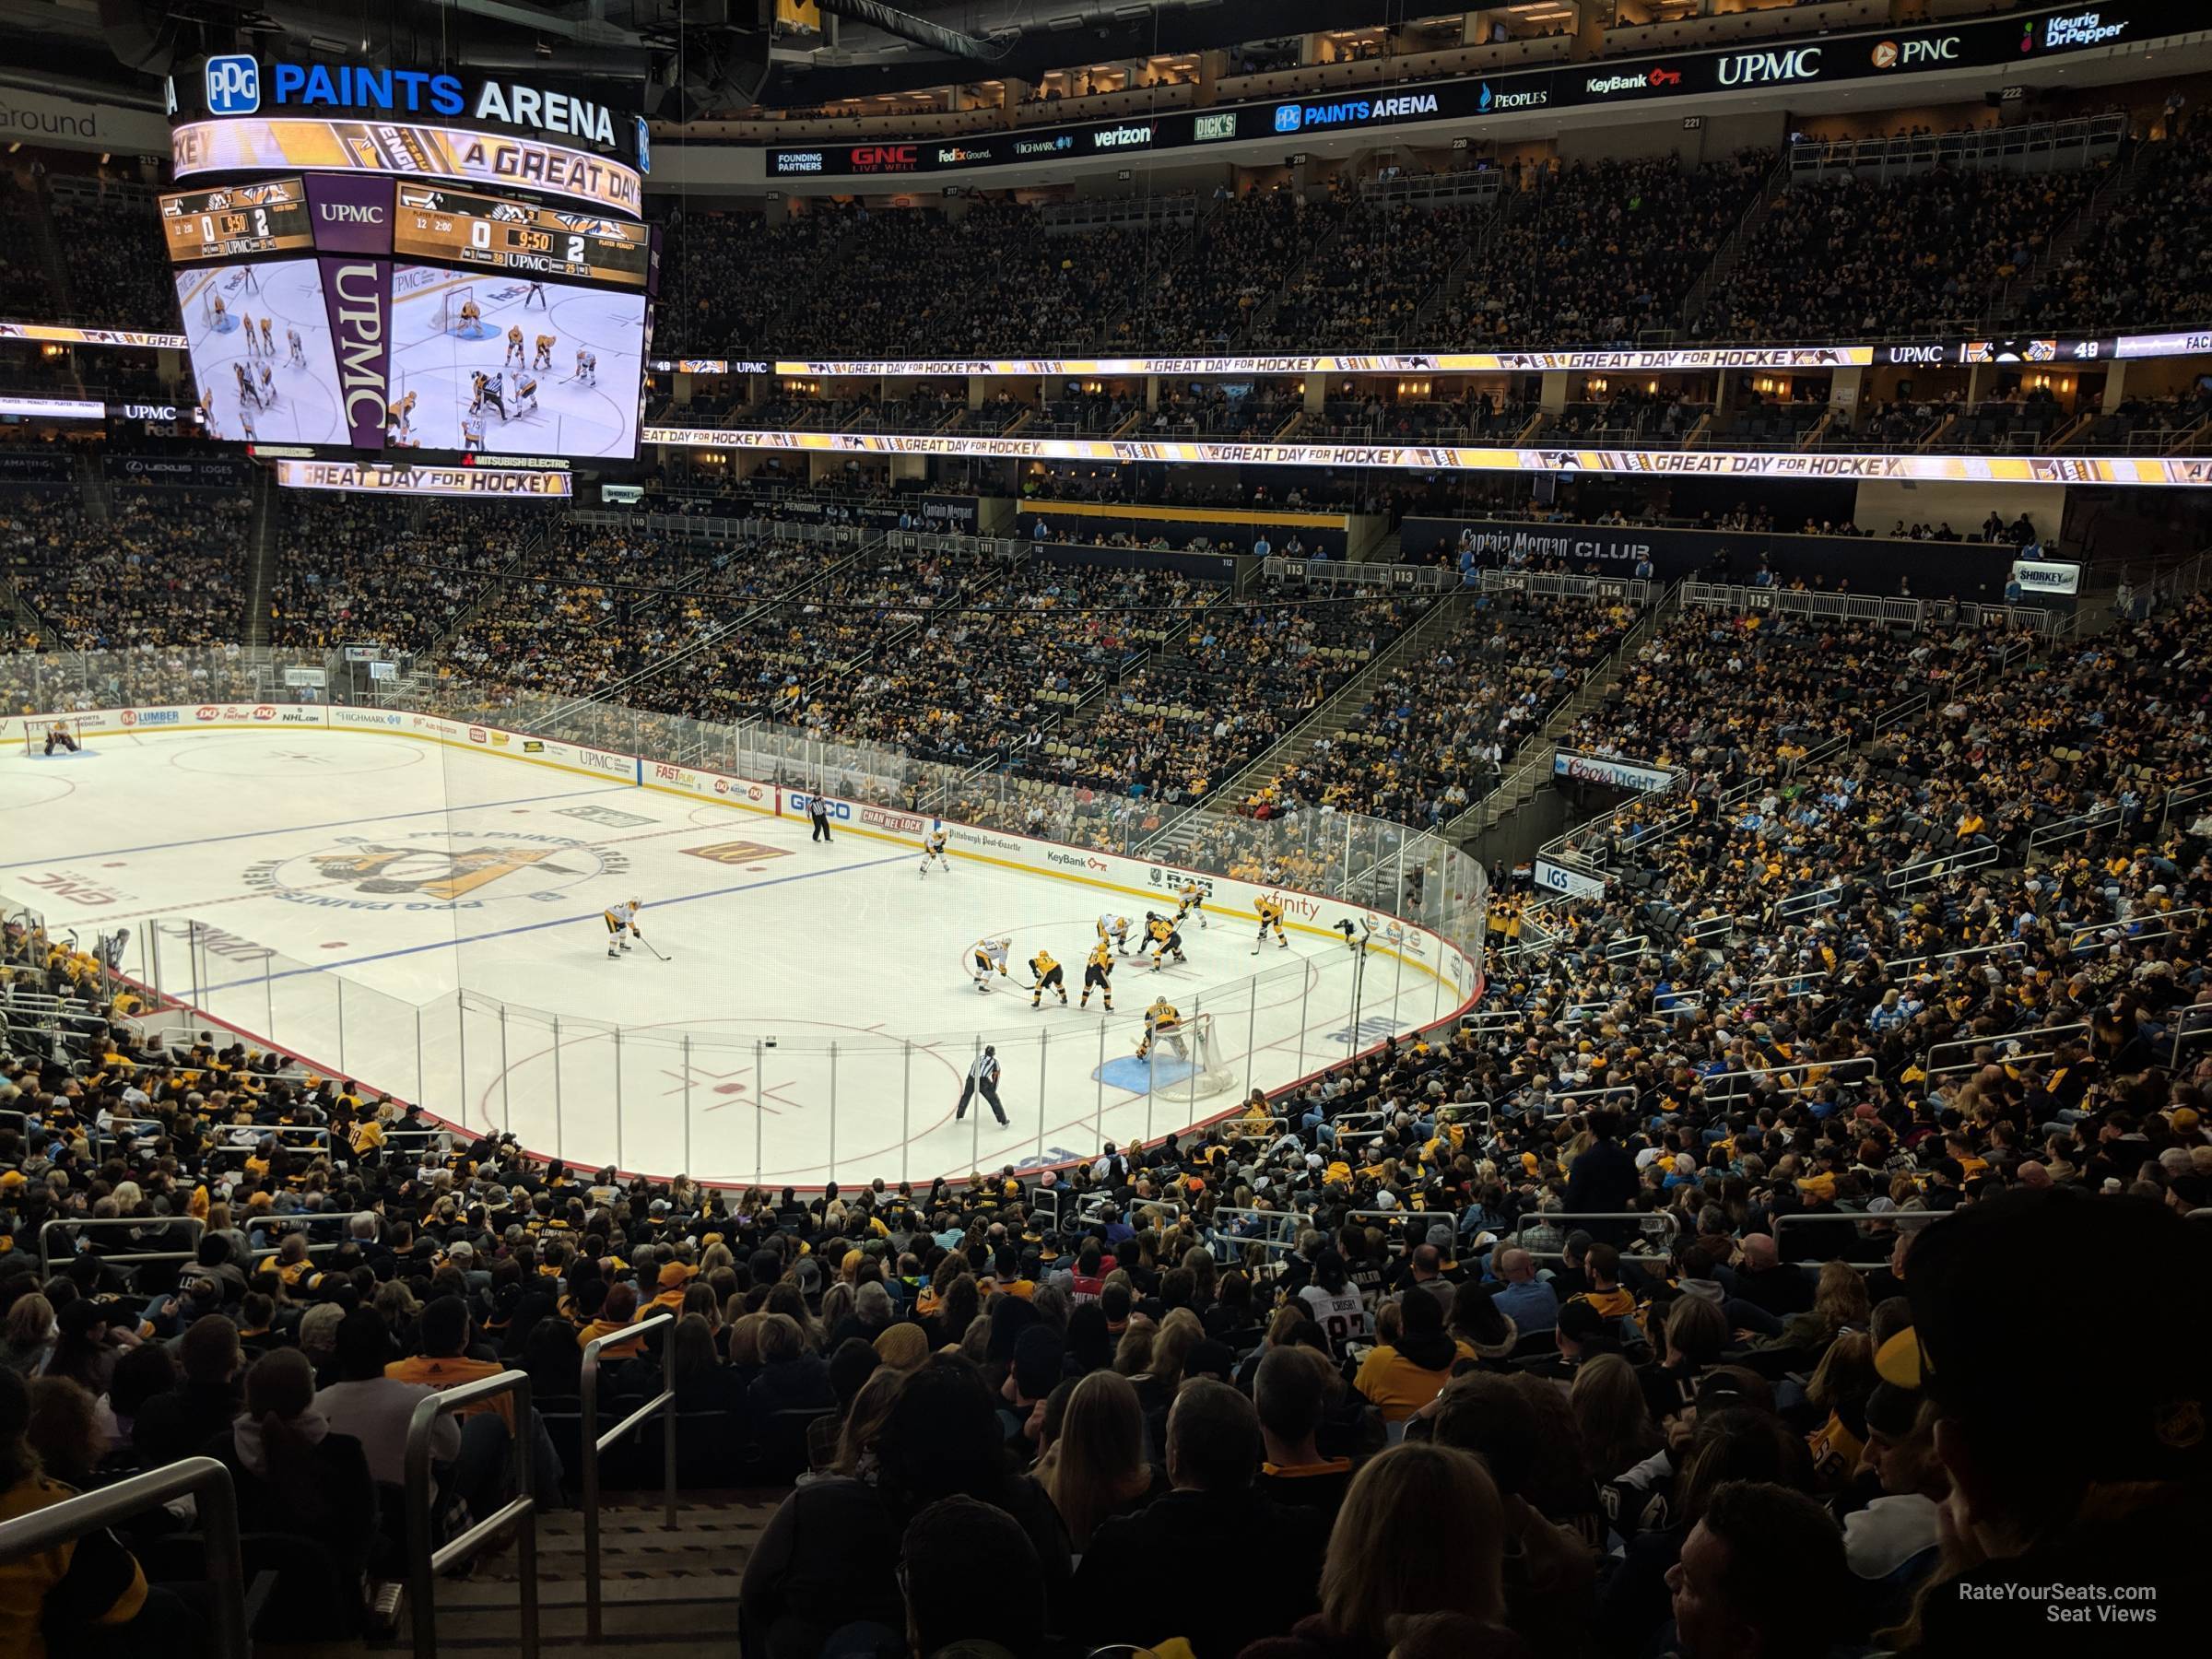 Section 207 at PPG Paints Arena 